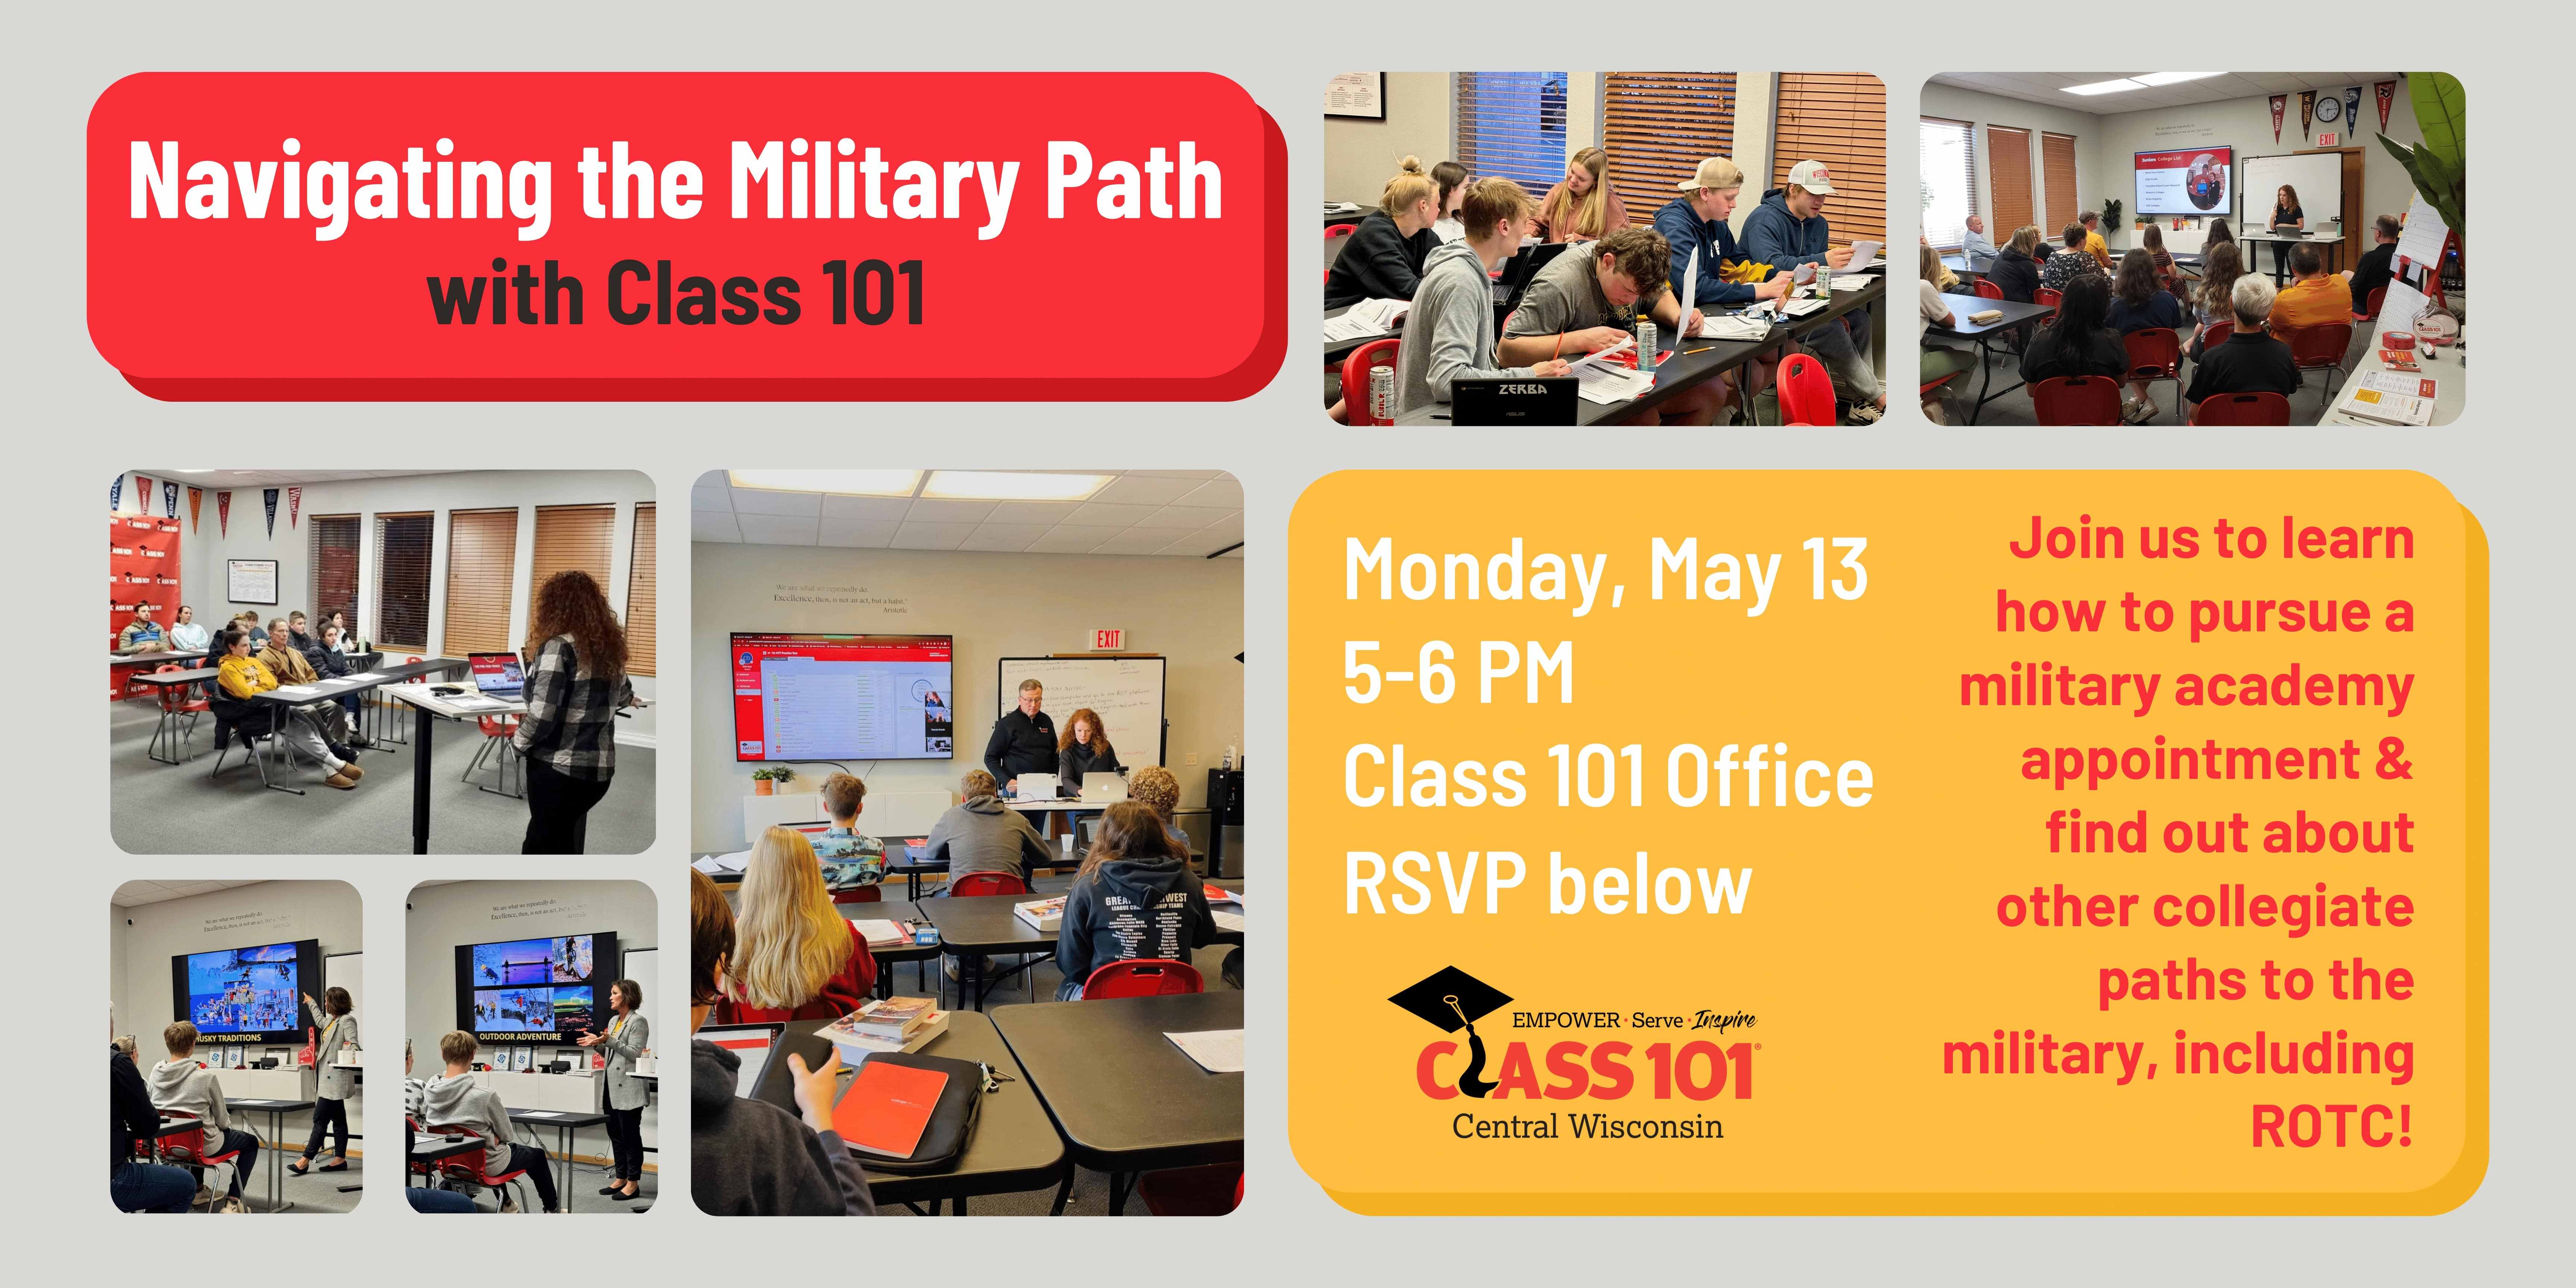 Navigating the Military Path Workshop